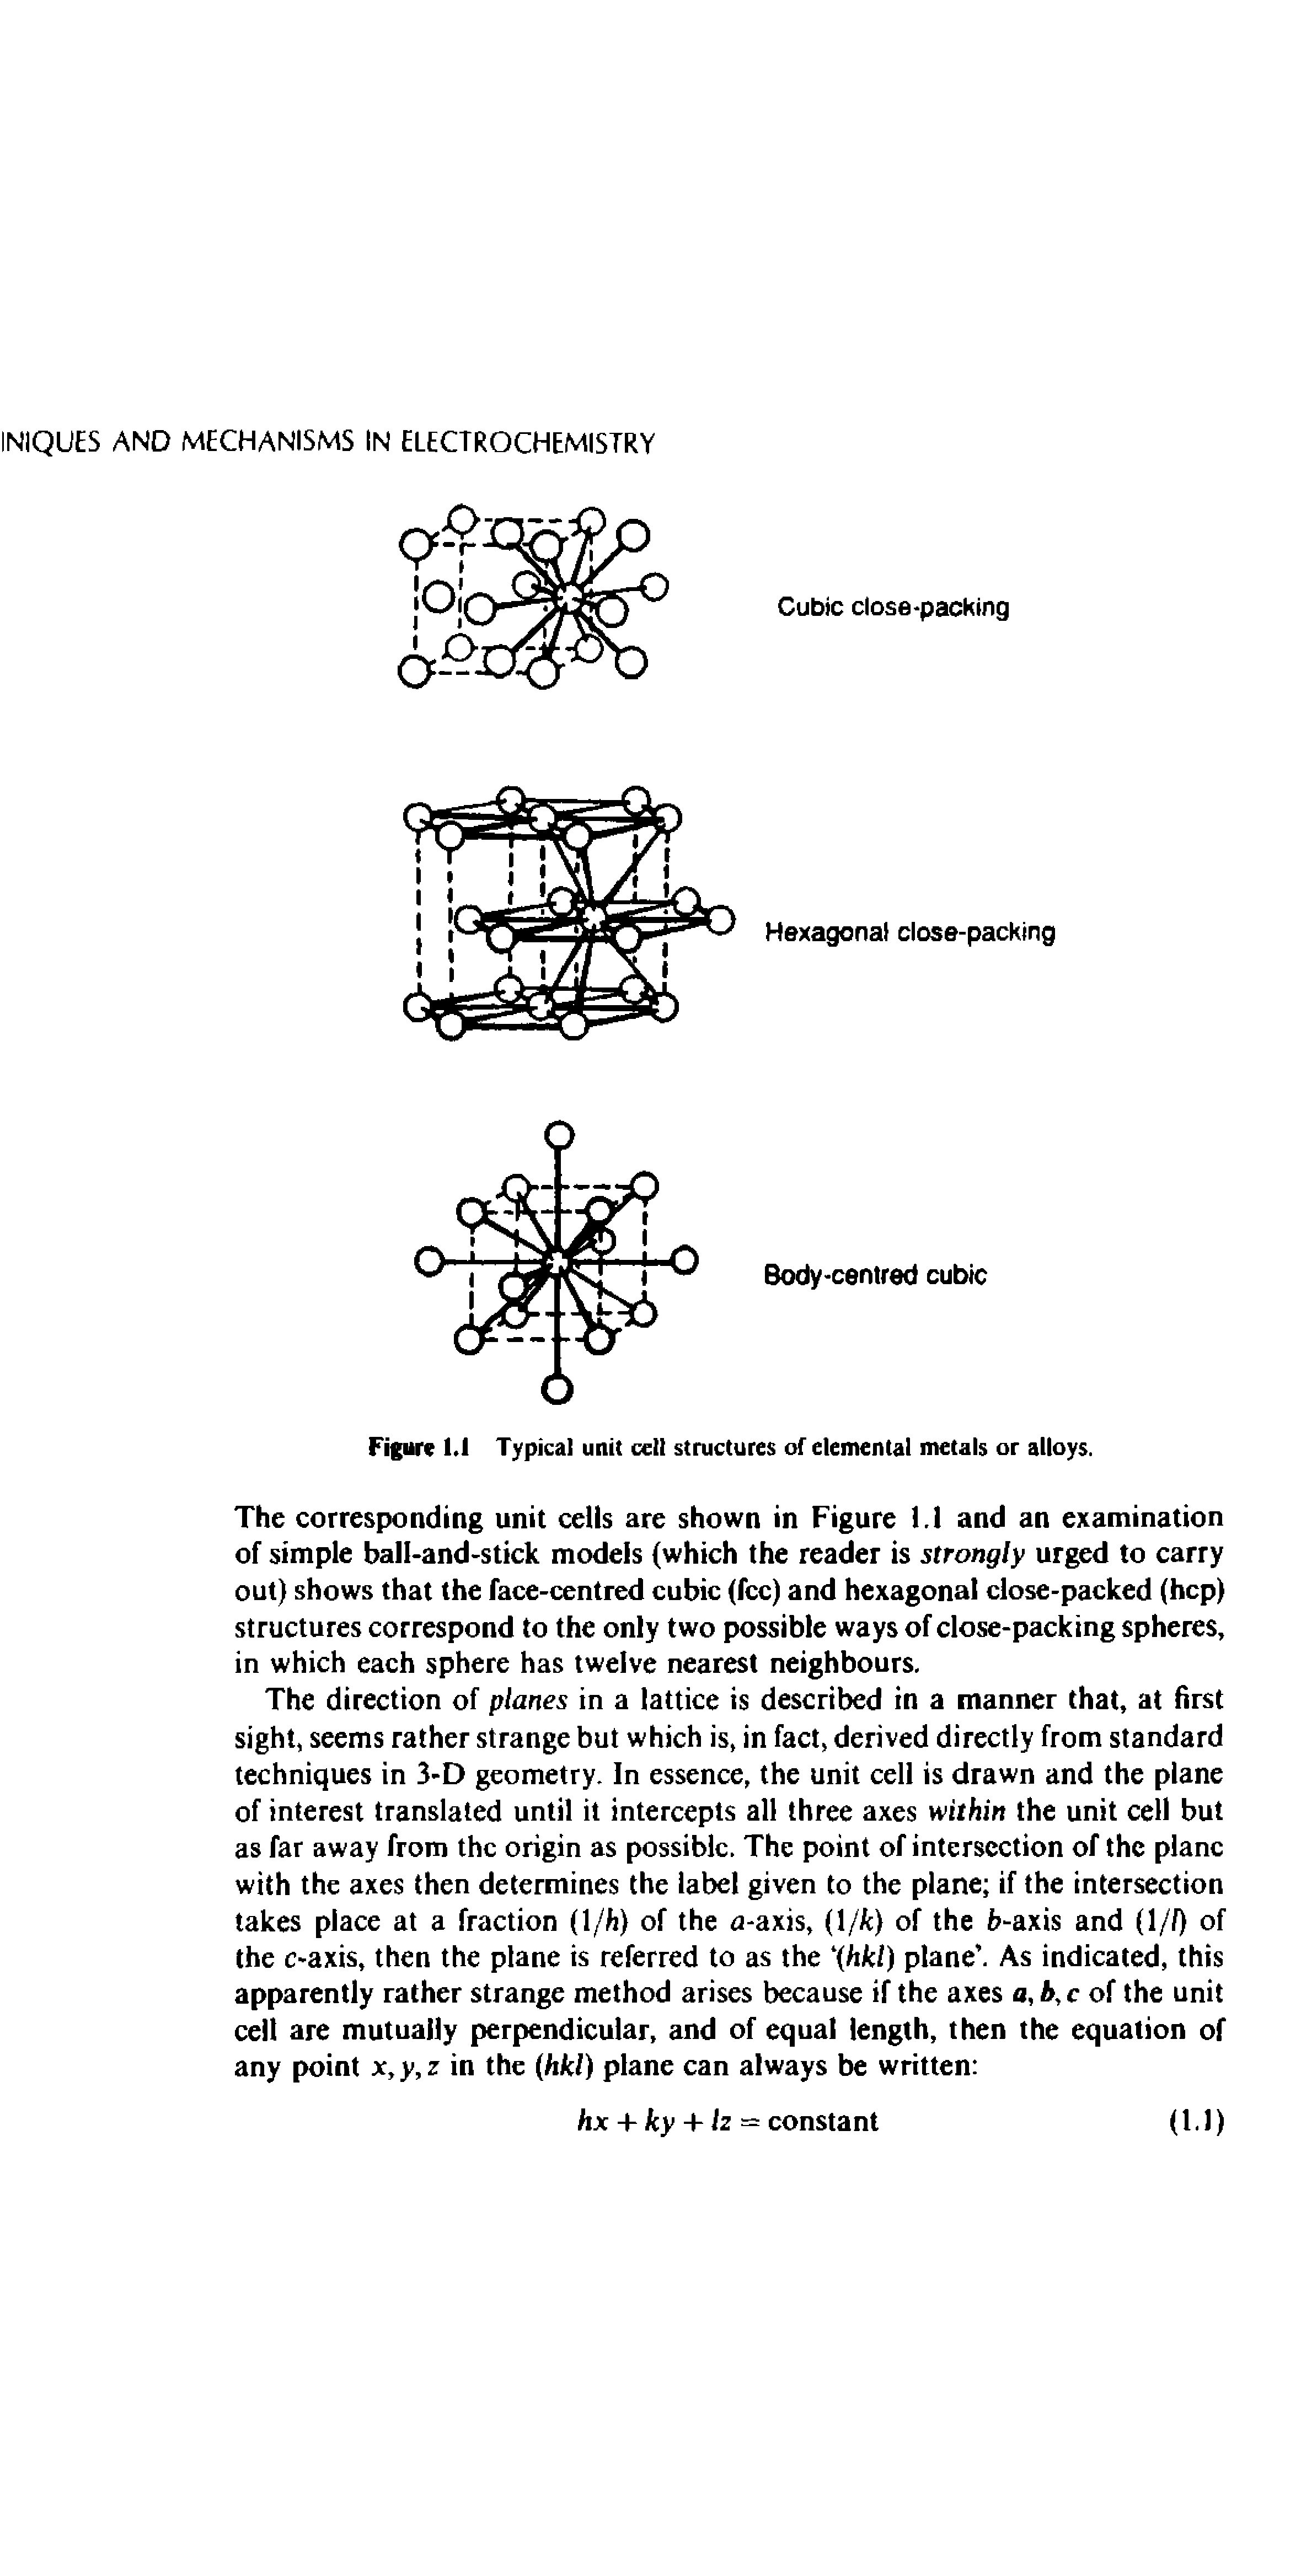 Figure 1.1 Typical unit cell structures of elemental metals or alloys.